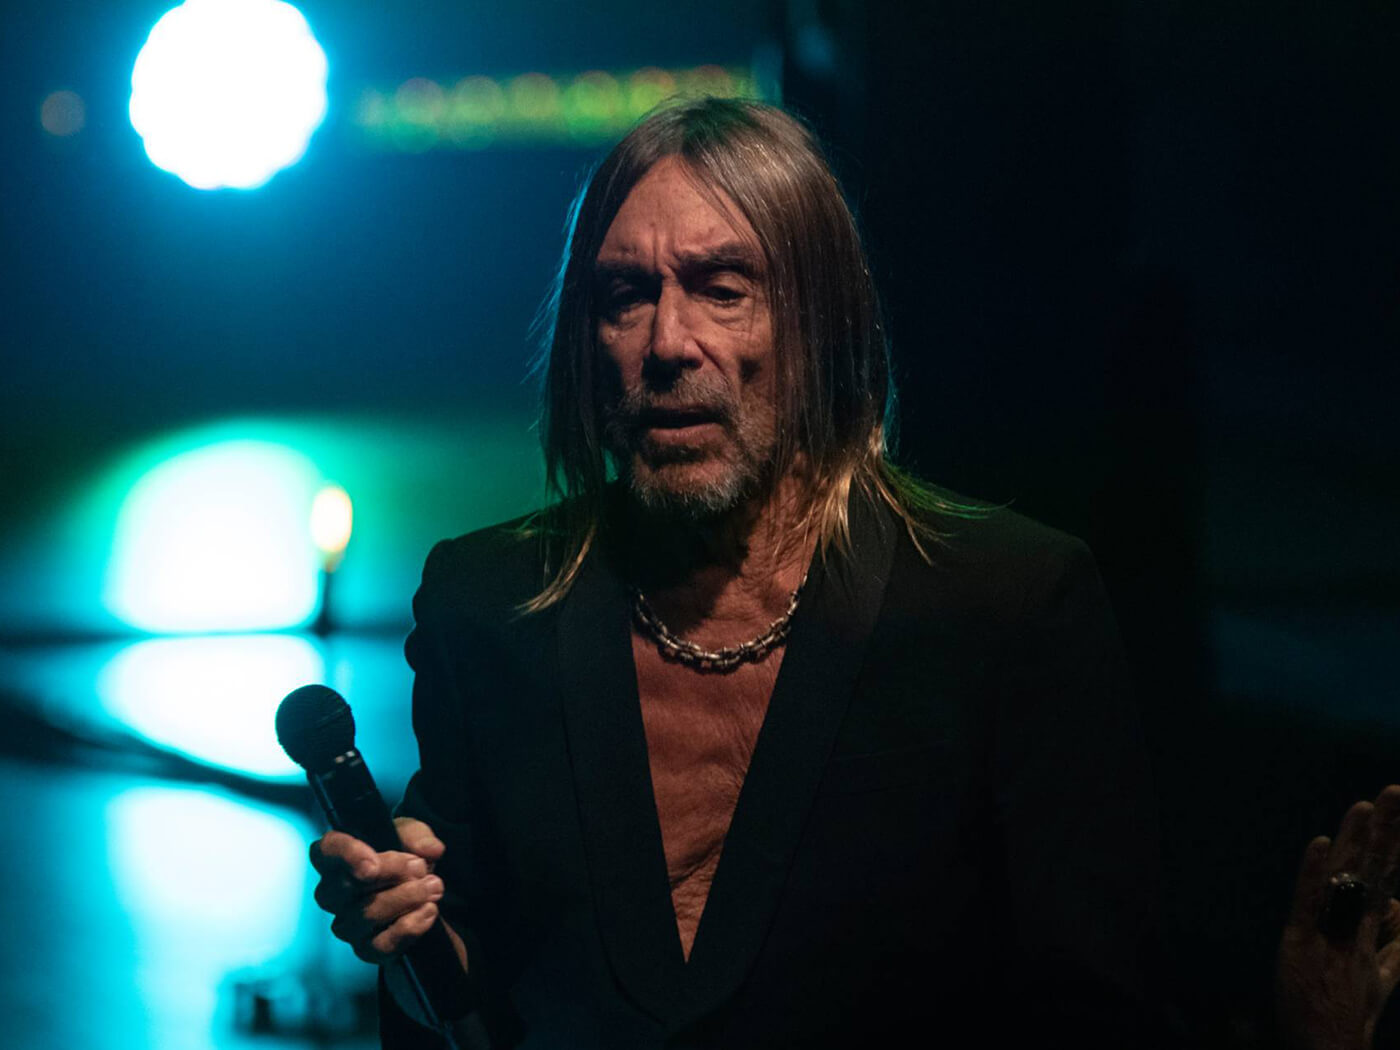 Iggy Pop confirms new single “Frenzy” from next solo album